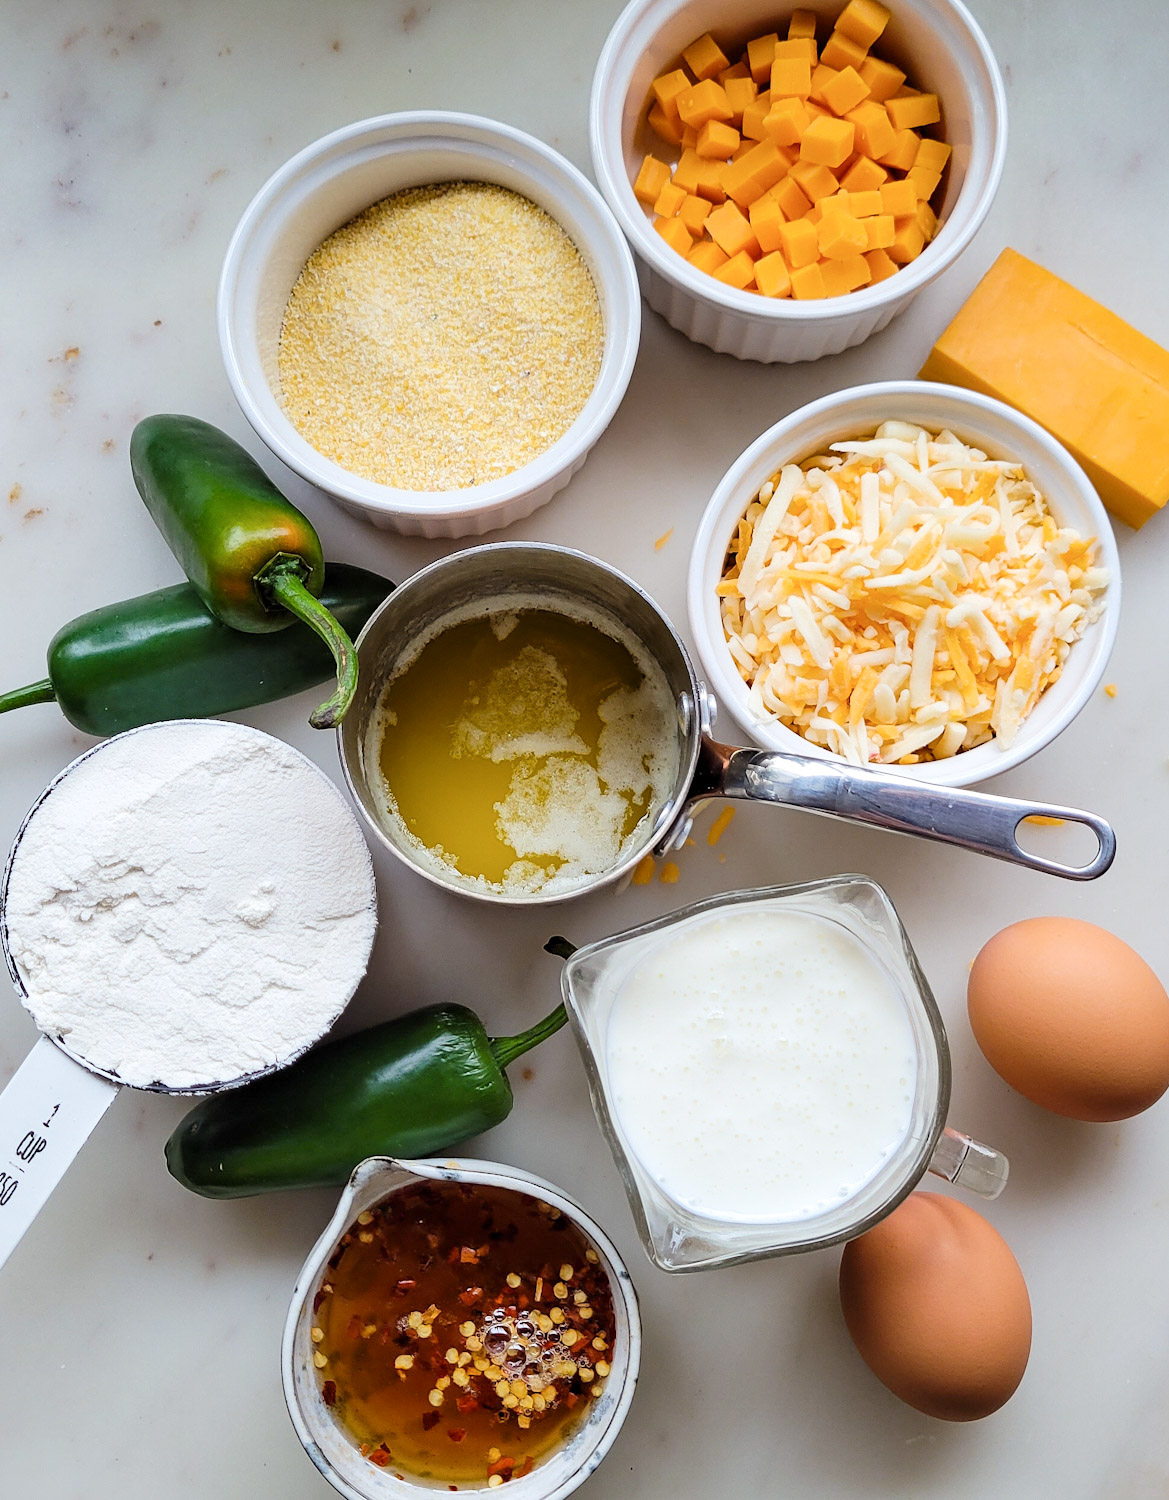 Ingredients to bake Jalapeno Cheddar Cornbread with Hot Honey on the counter.